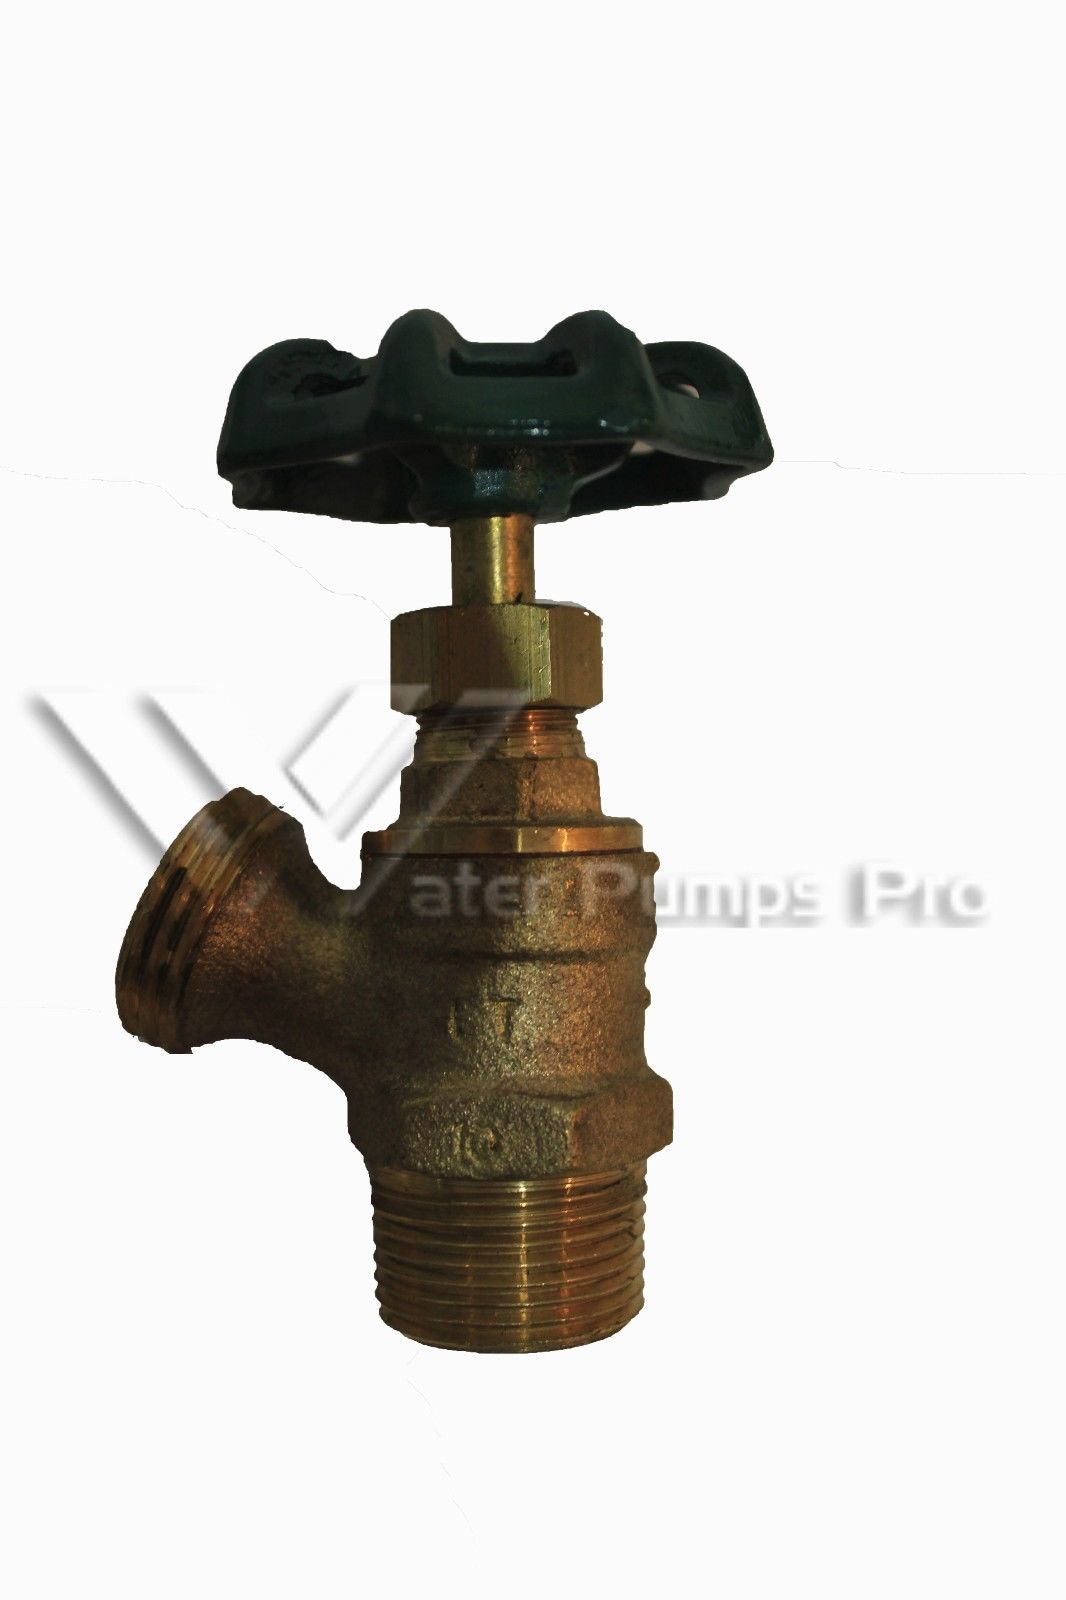 BBD75MA Boiler Drain Hose Bibb with Angle Outlet